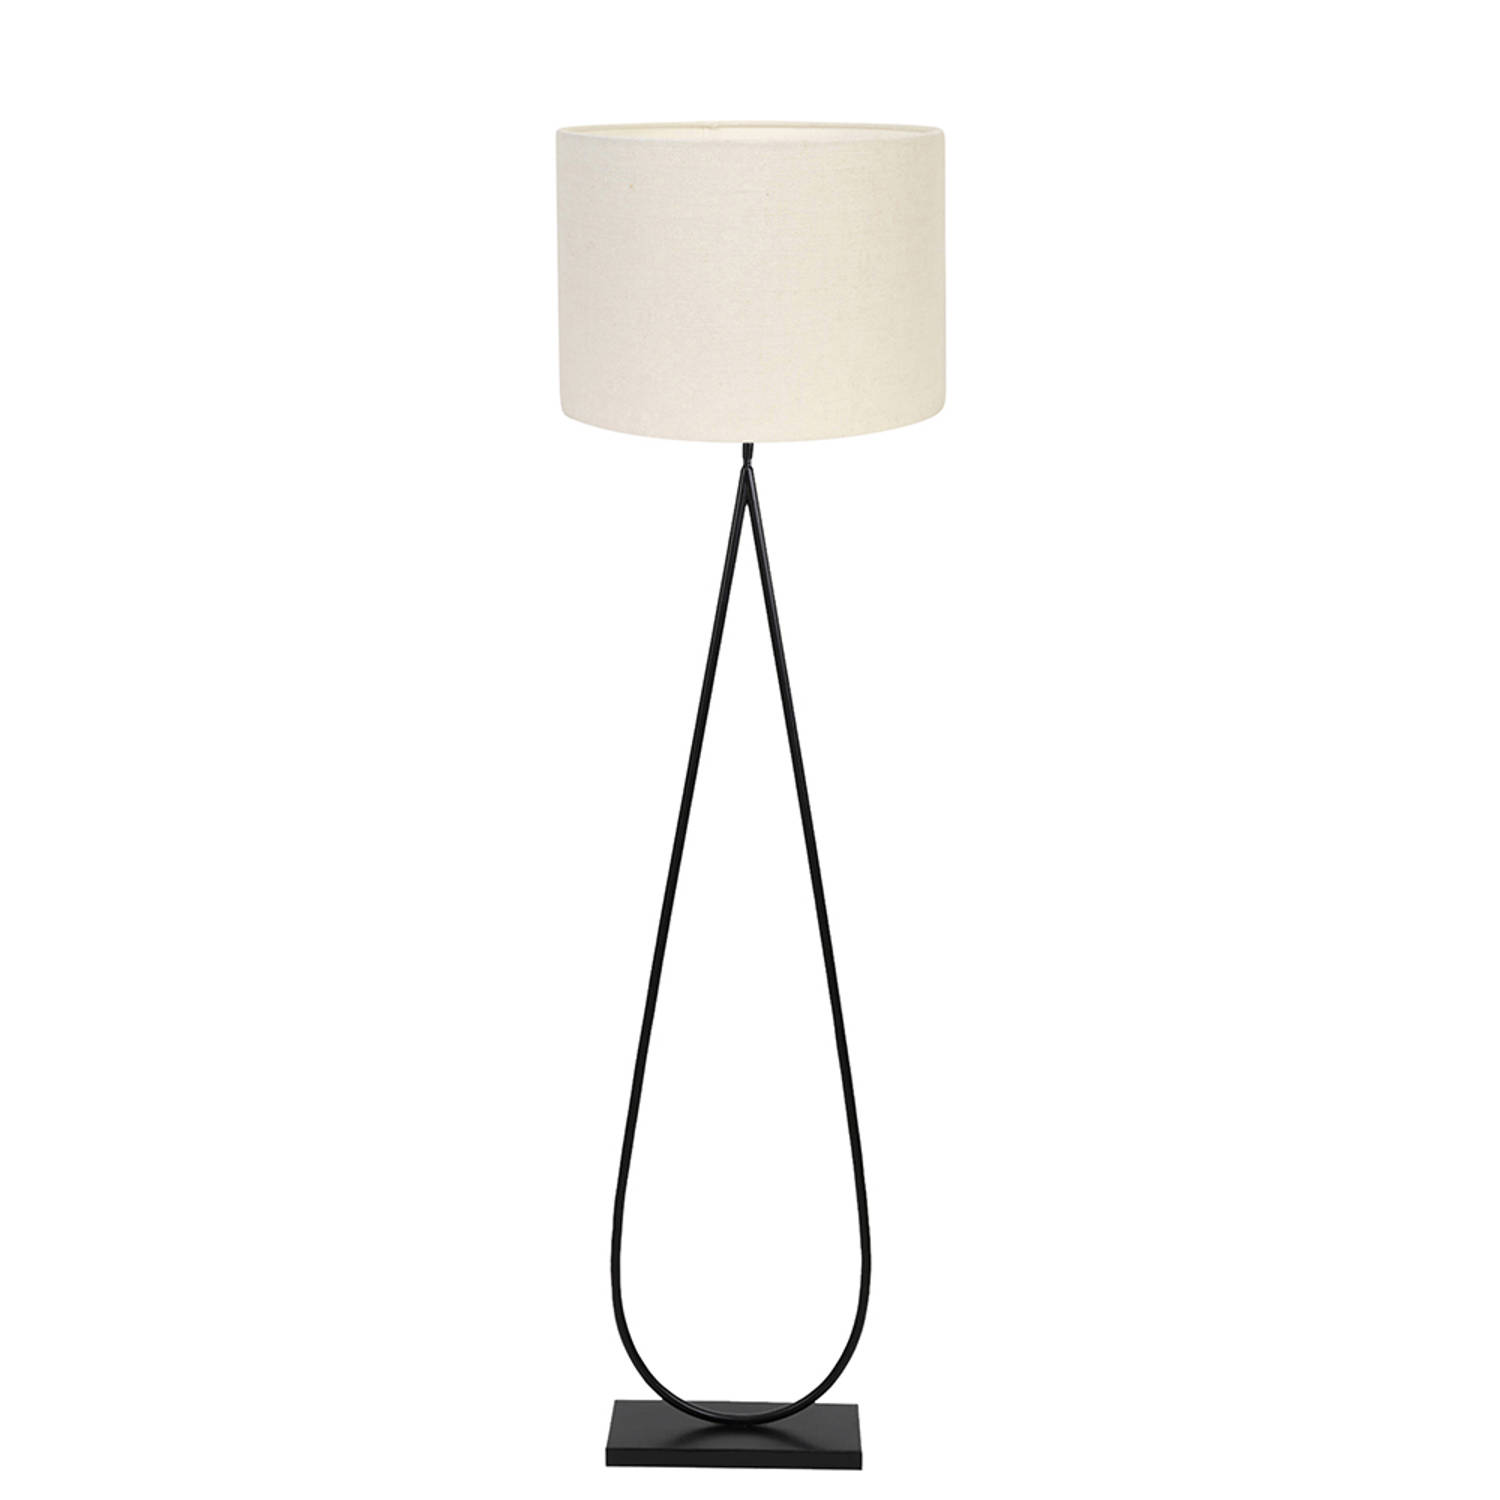 Light and Living Tamsu vloerlamp - Ø 50 cm - E27 (grote fitting) - wit